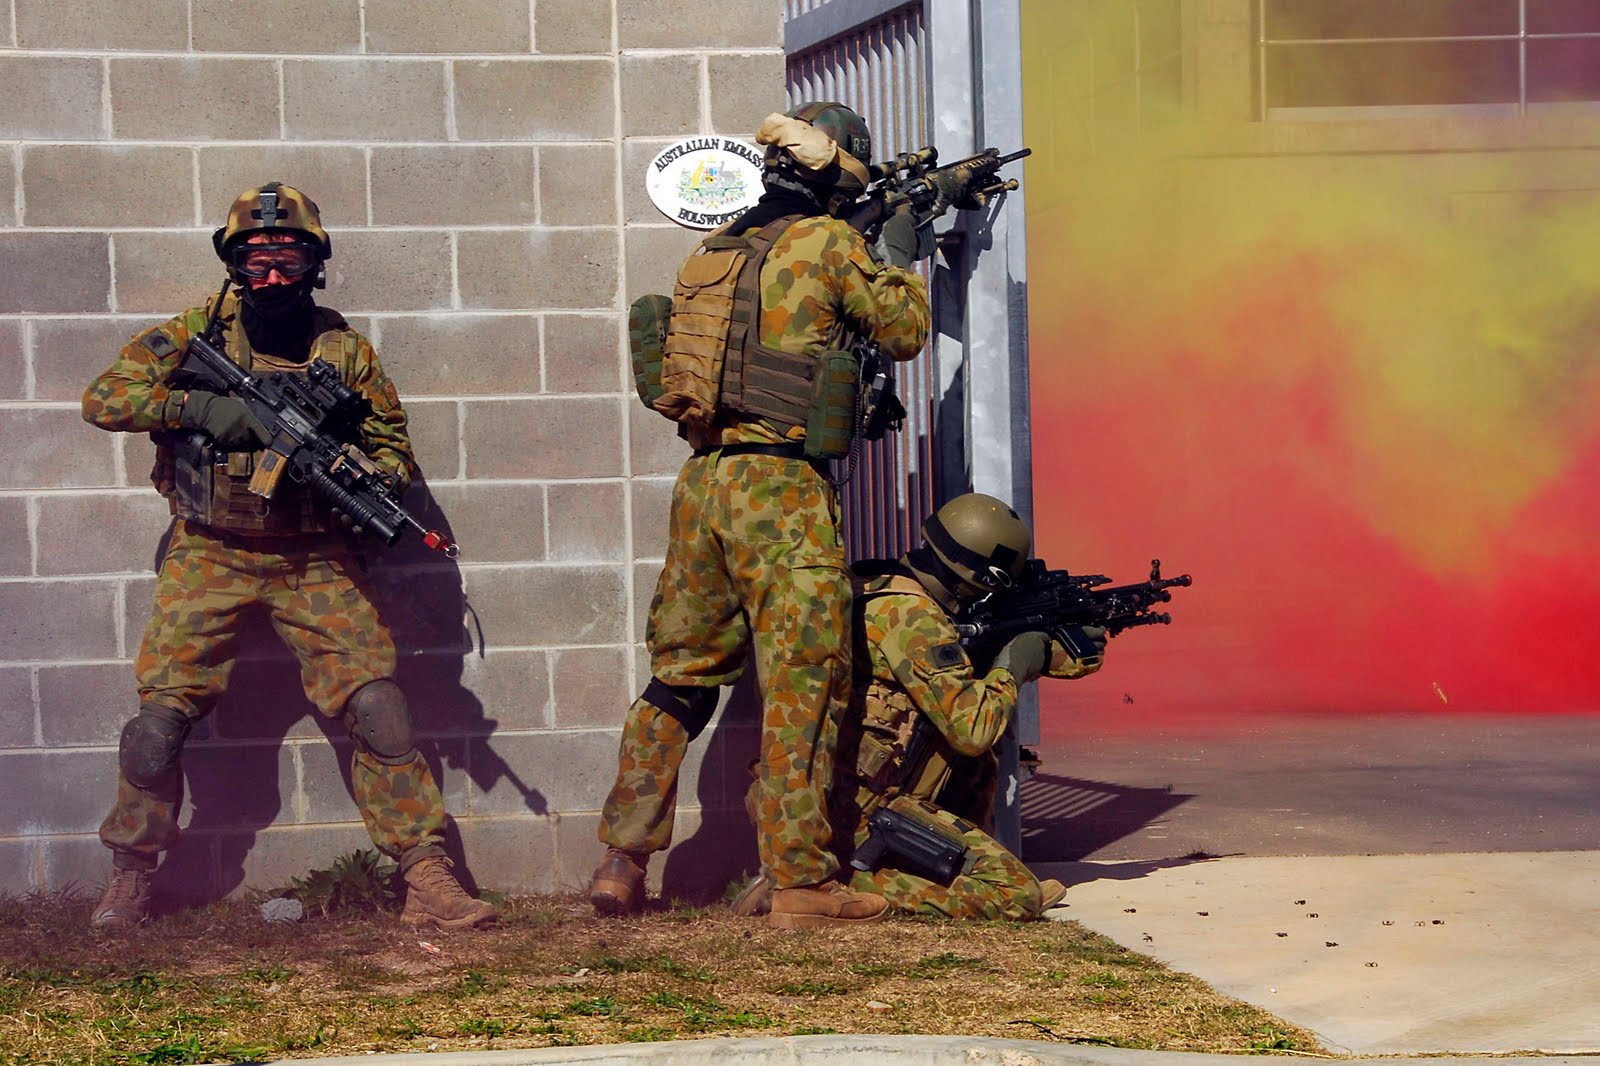 Operation unit. Tactical Assault Group East. Special Operations Unit - Signal Forces. Картинки z v армия. Australian Special Forces что это Tactical Assault Group эмблема.